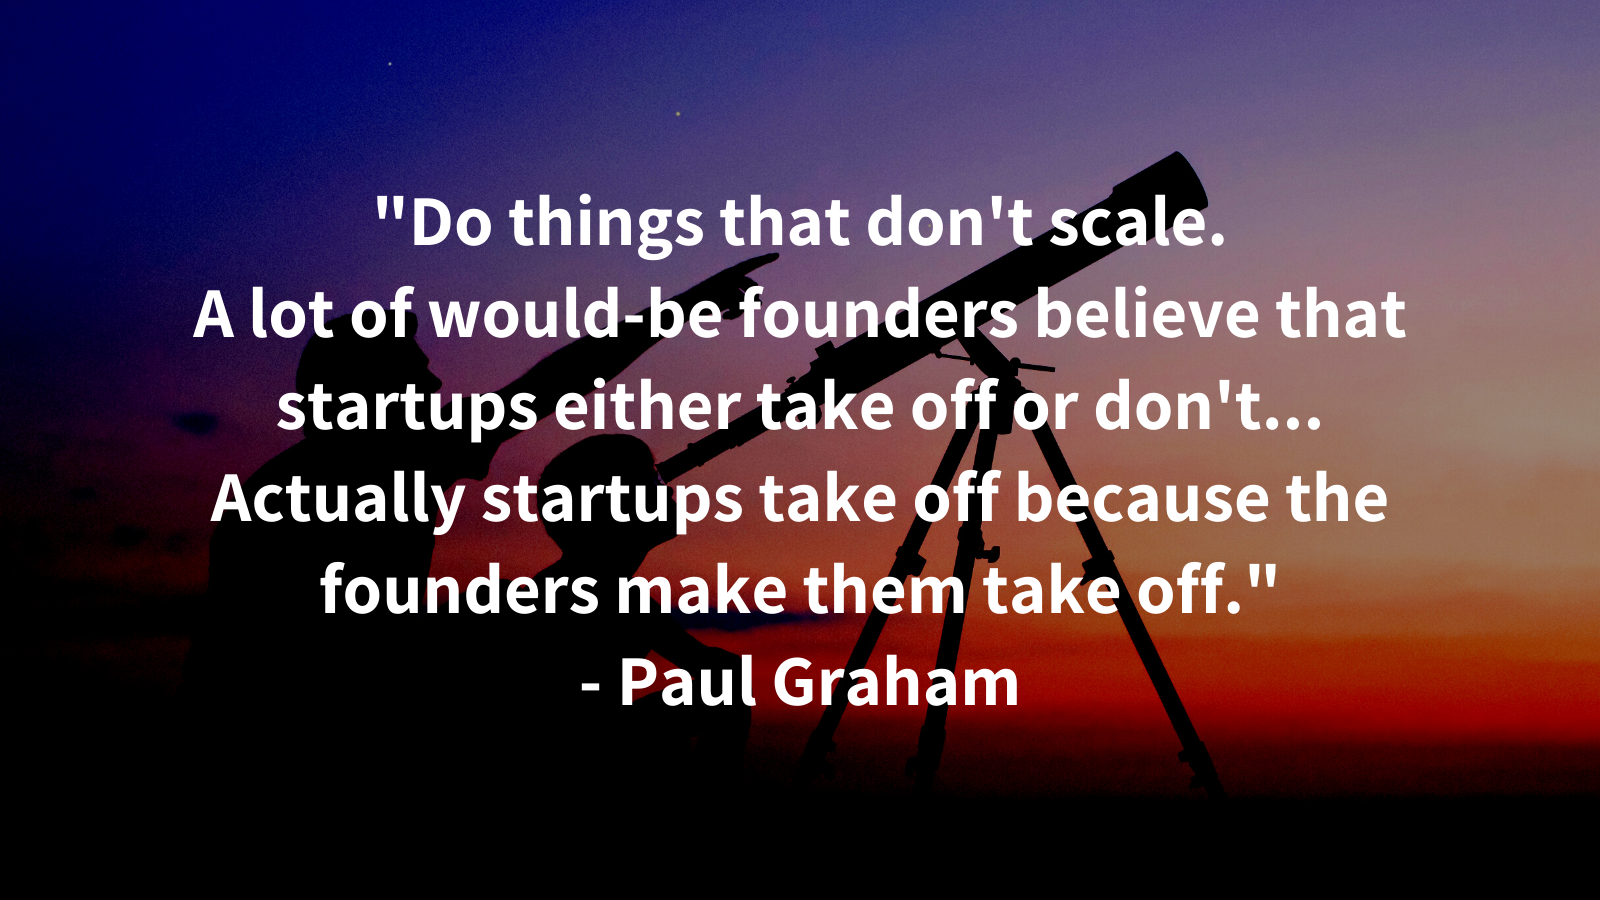 Do things that don't scale